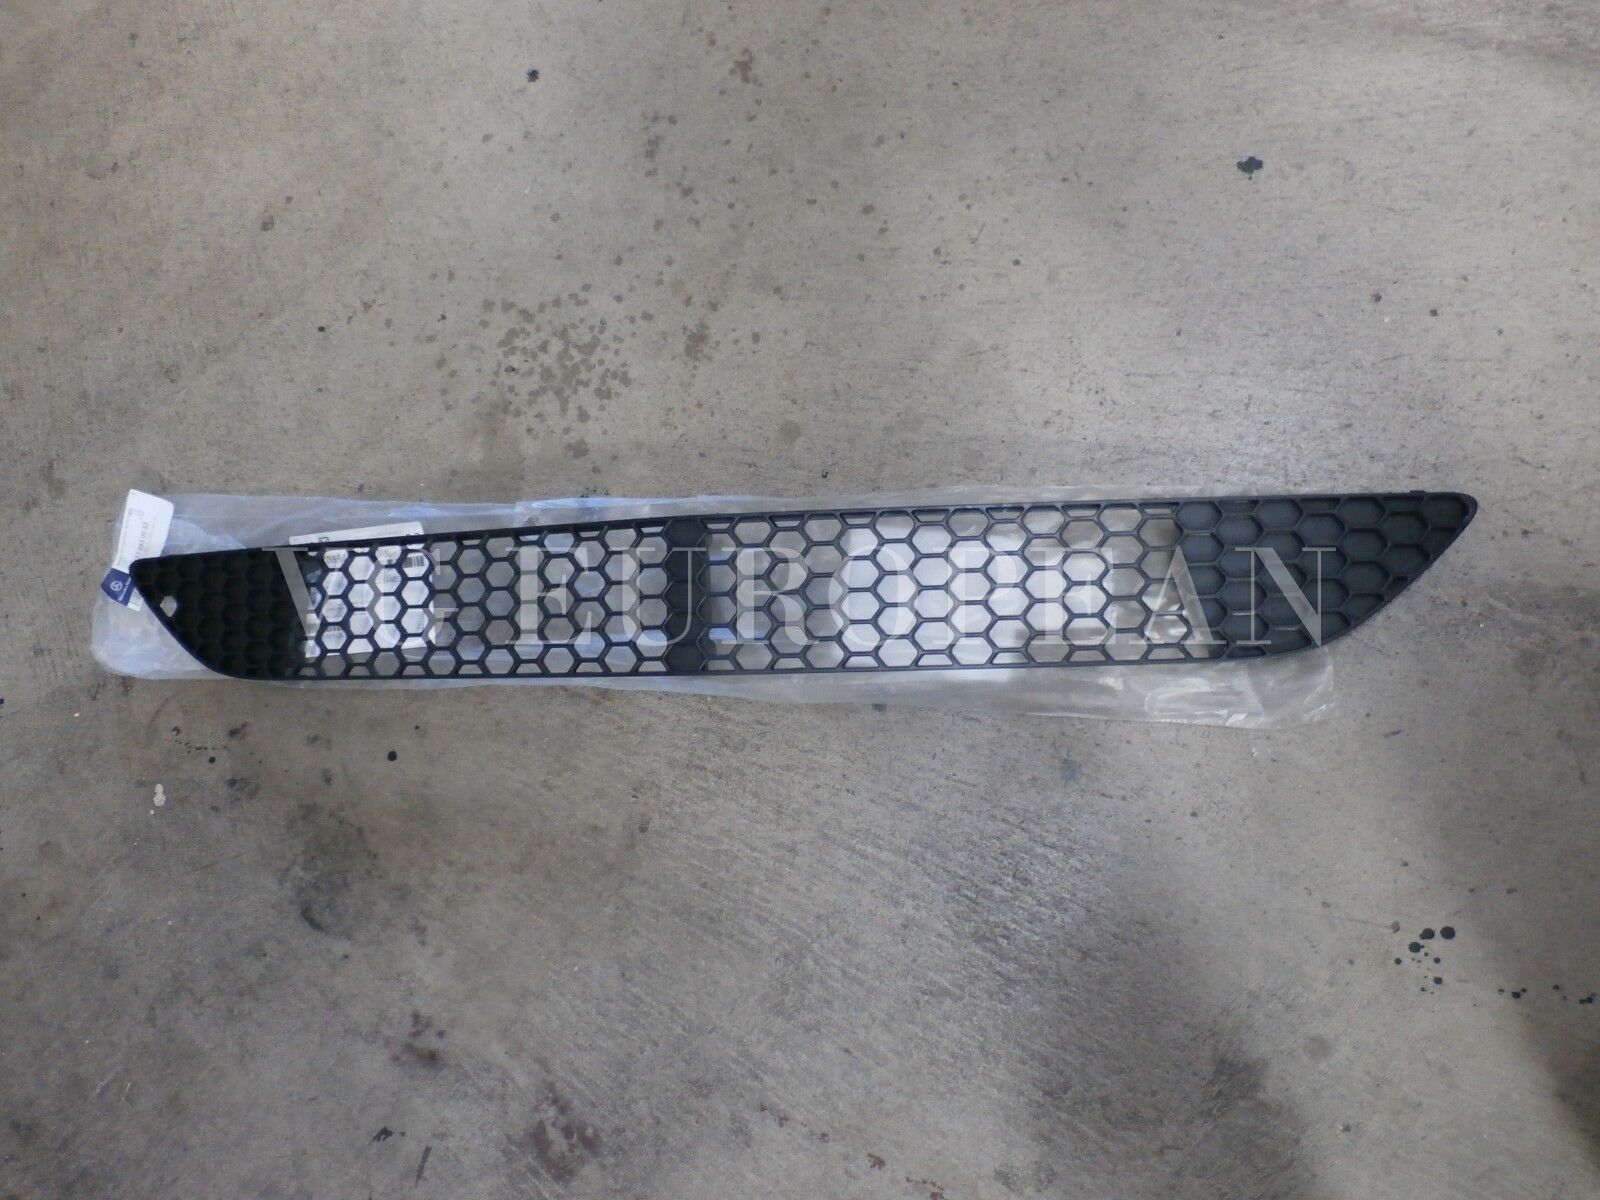 Mercedes W221 Genuine AMG Front Bumper Cover Center Mesh Grille S550 NEW 2007-09